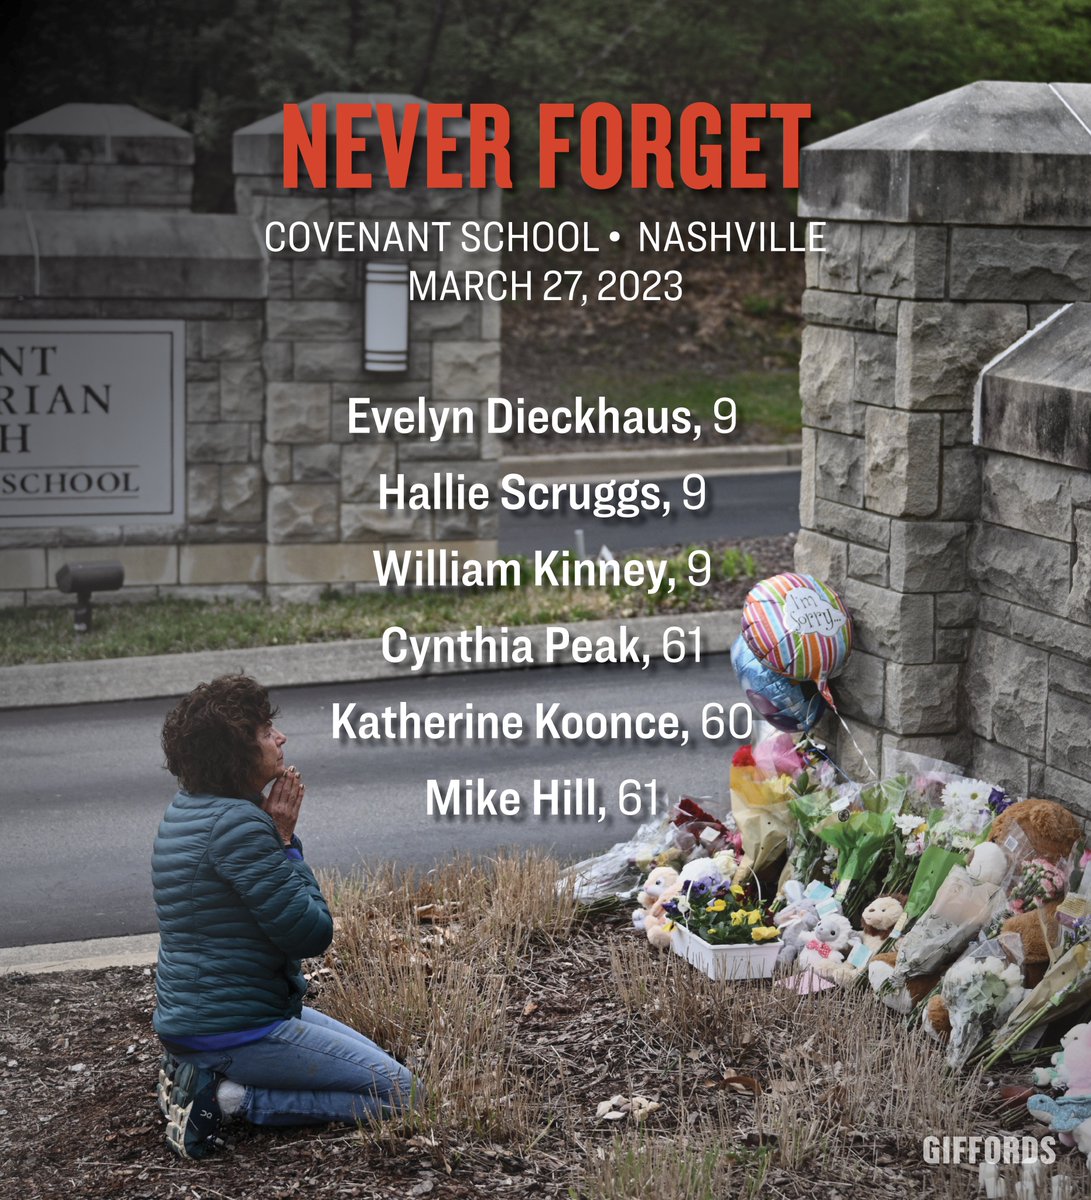 One year ago today, 3 students and 3 staff members were shot and killed at the Covenant School in Nashville. Our schools should be safe havens. Instead, an entire generation is traumatized by gun violence. As we remember the victims, we recommit to honoring them with action.